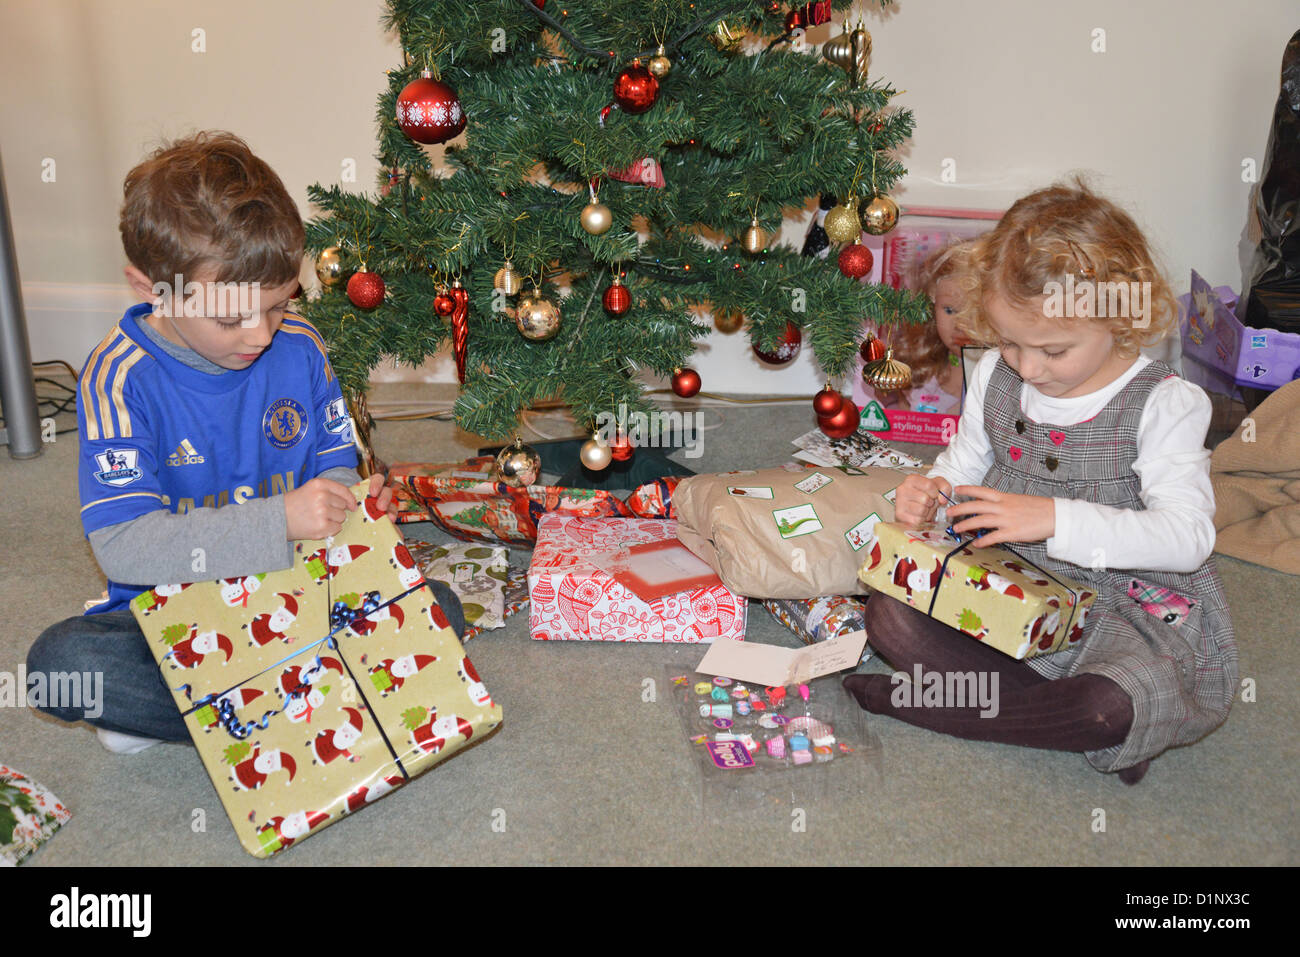 Young boy and girl opening presents by Christmas tree, Kingston upon Thames, Greater London, England, United Kingdom Stock Photo